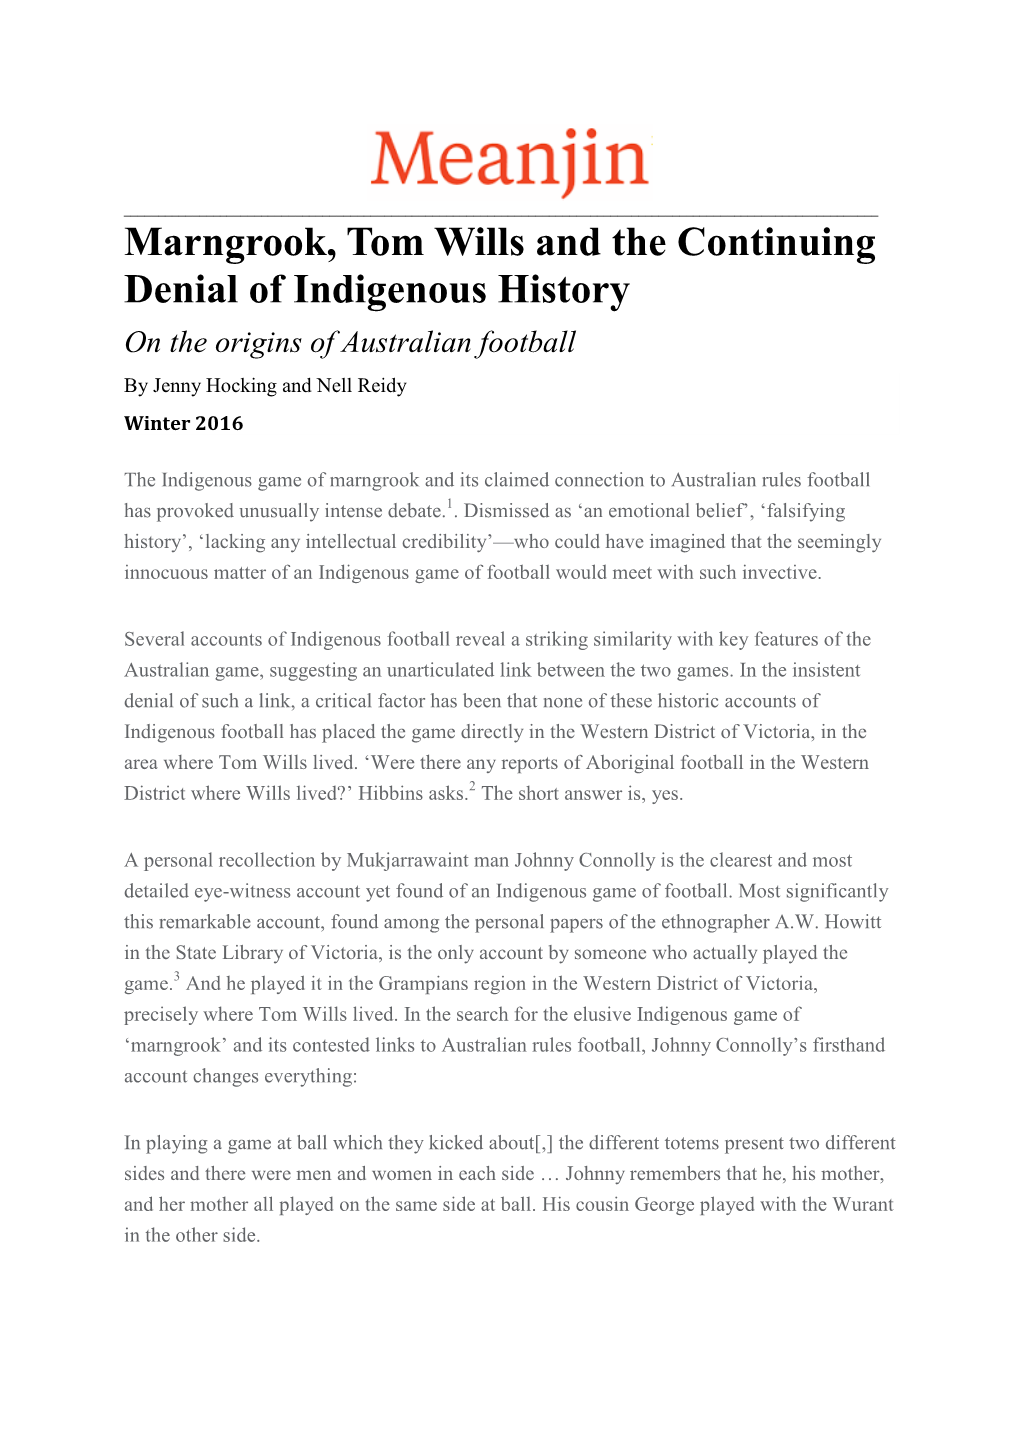 Marngrook, Tom Wills and the Continuing Denial of Indigenous History on the Origins of Australian Football by Jenny Hocking and Nell Reidy Winter 2016